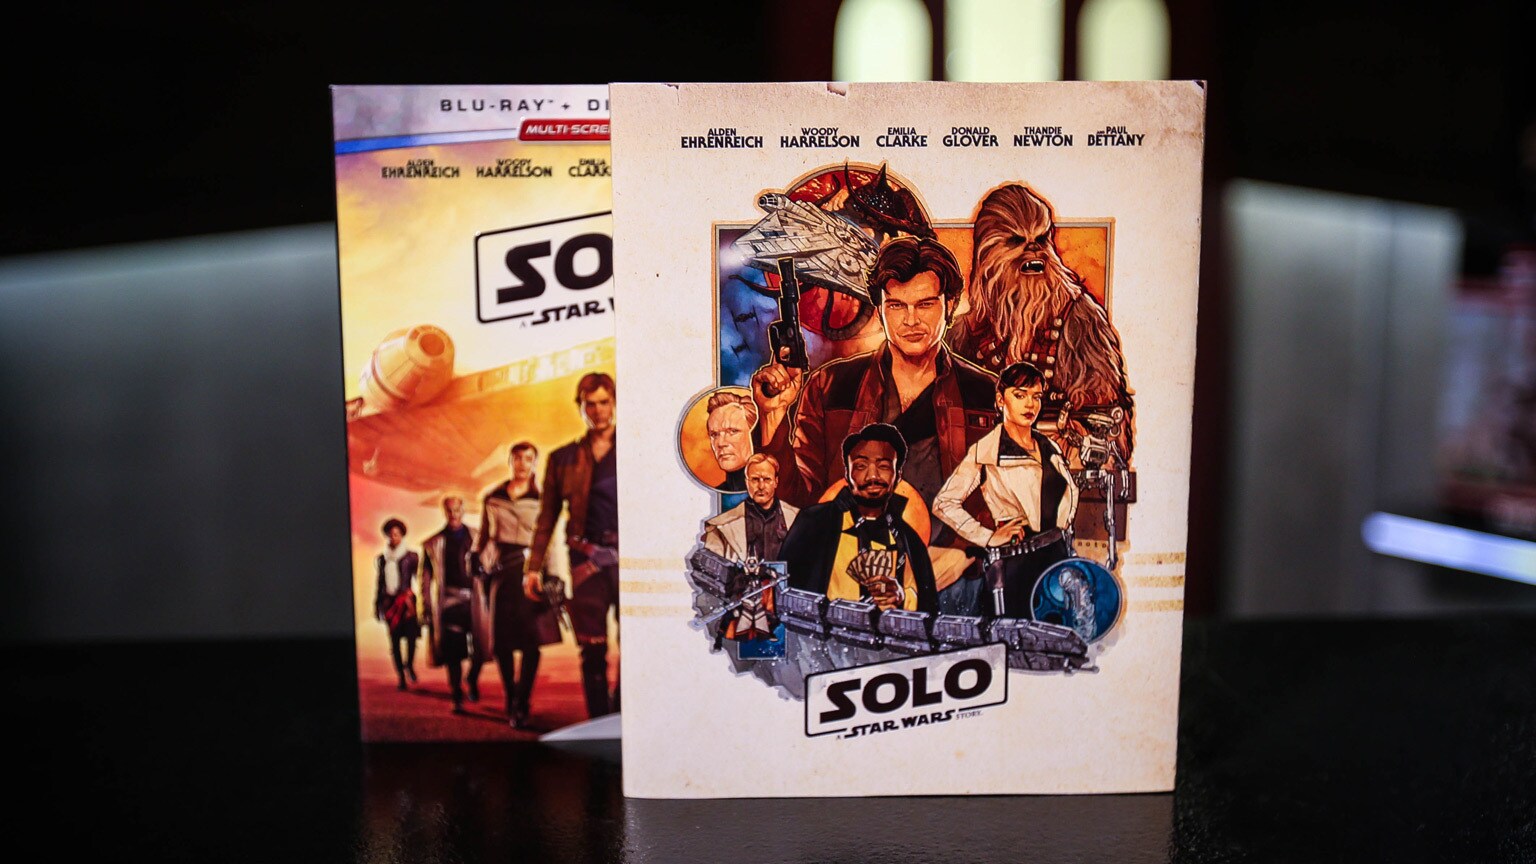 Make a Special Modification to Your Solo: A Star Wars Story Blu-ray with StarWars.com's Exclusive Cover